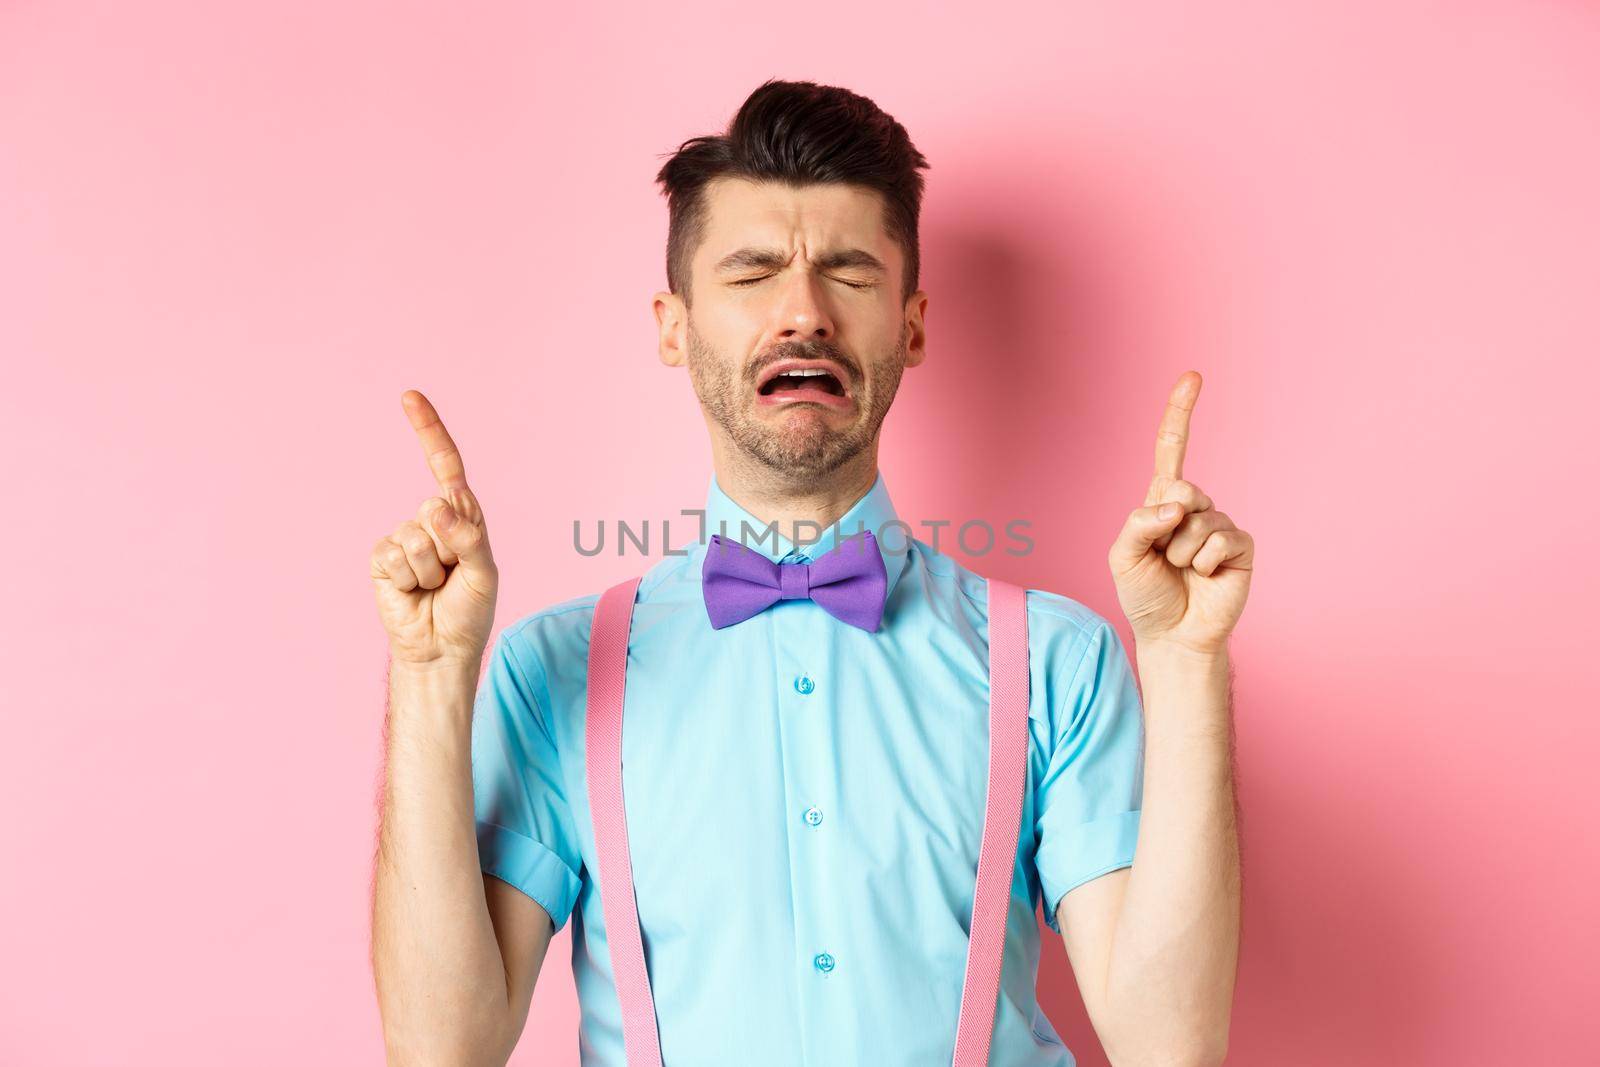 Sad and miserable guy sobbing and crying, pointing fingers up and something disappointed, standing upset on pink background.